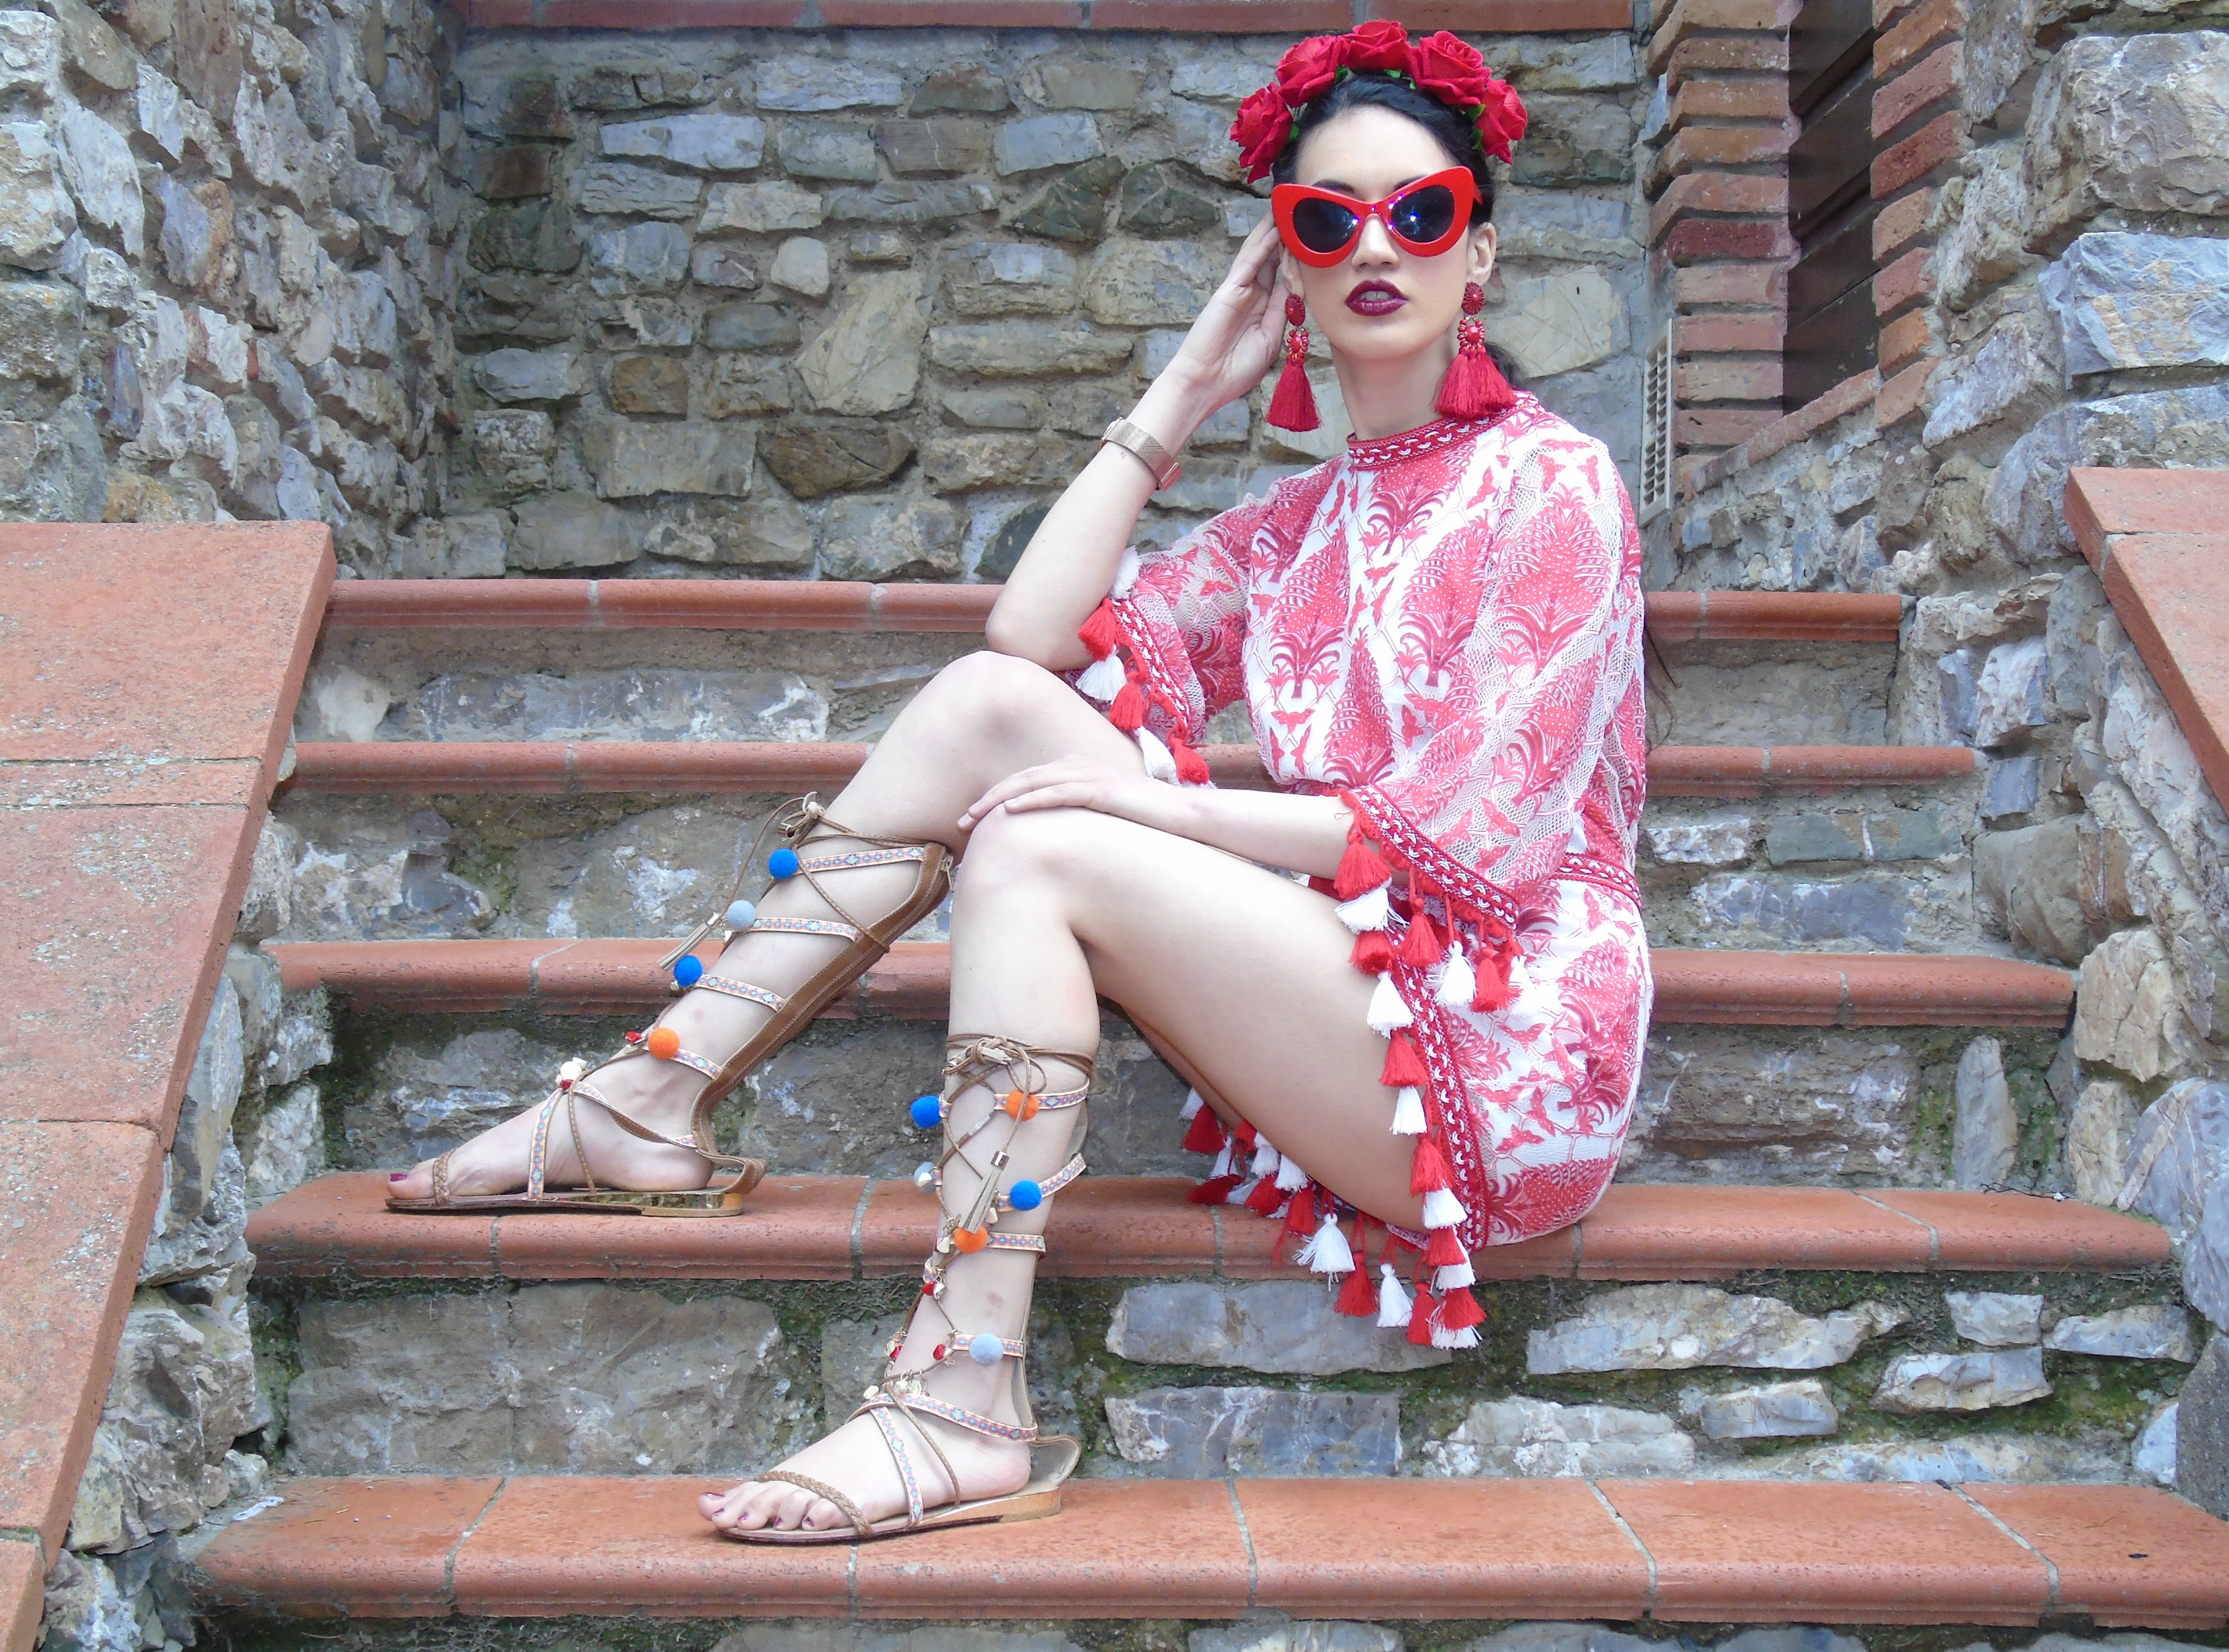 <img src="ana.jpg" alt="ana red tassel crochet playsuit what to wear on holiday in Tuscany"/>